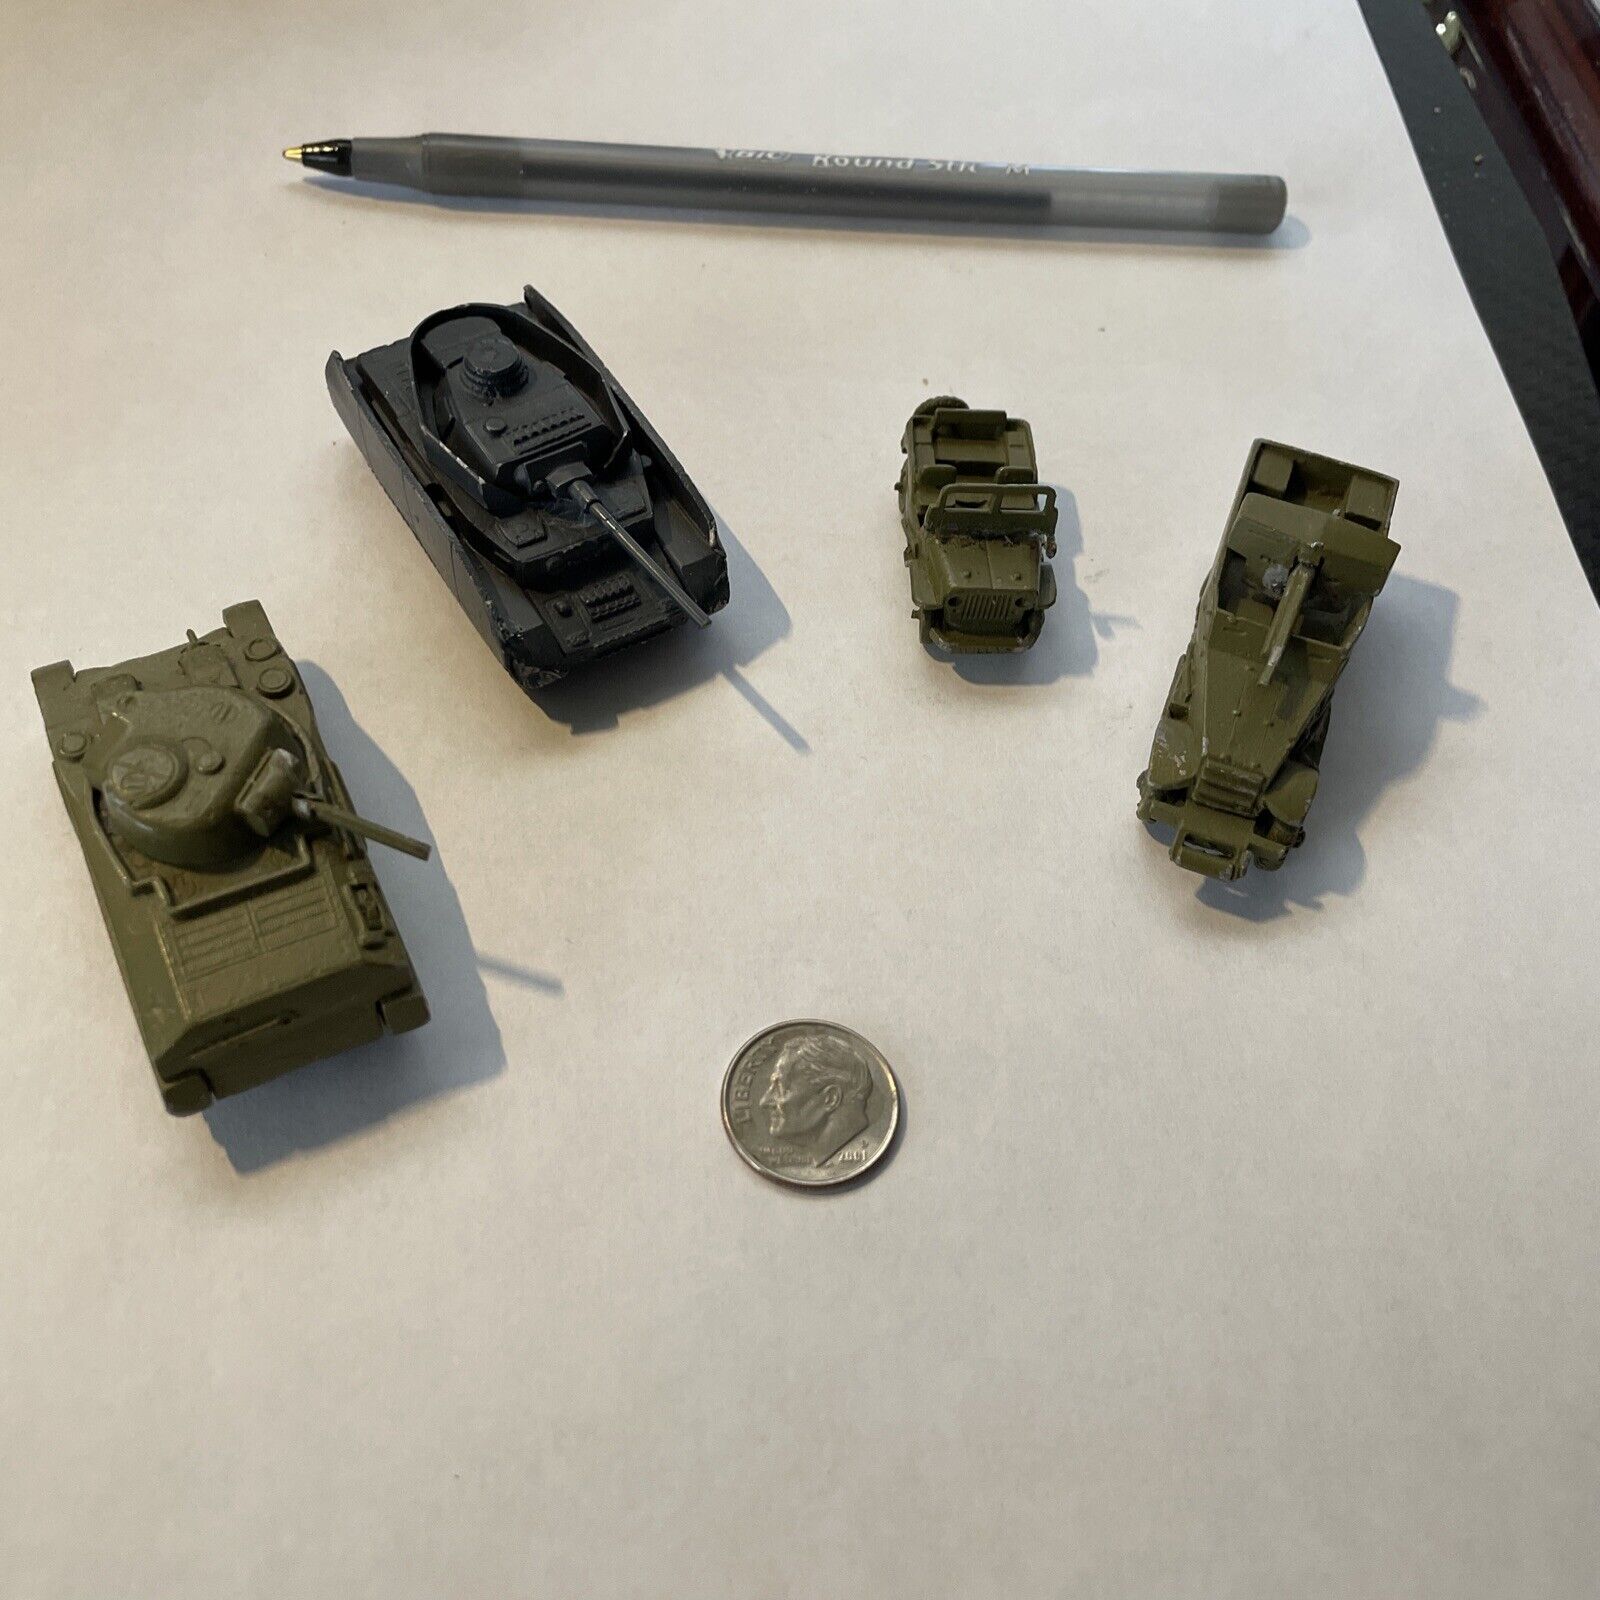 Comet WW2 Metal Soldiers And Vehicles With Other related Gear